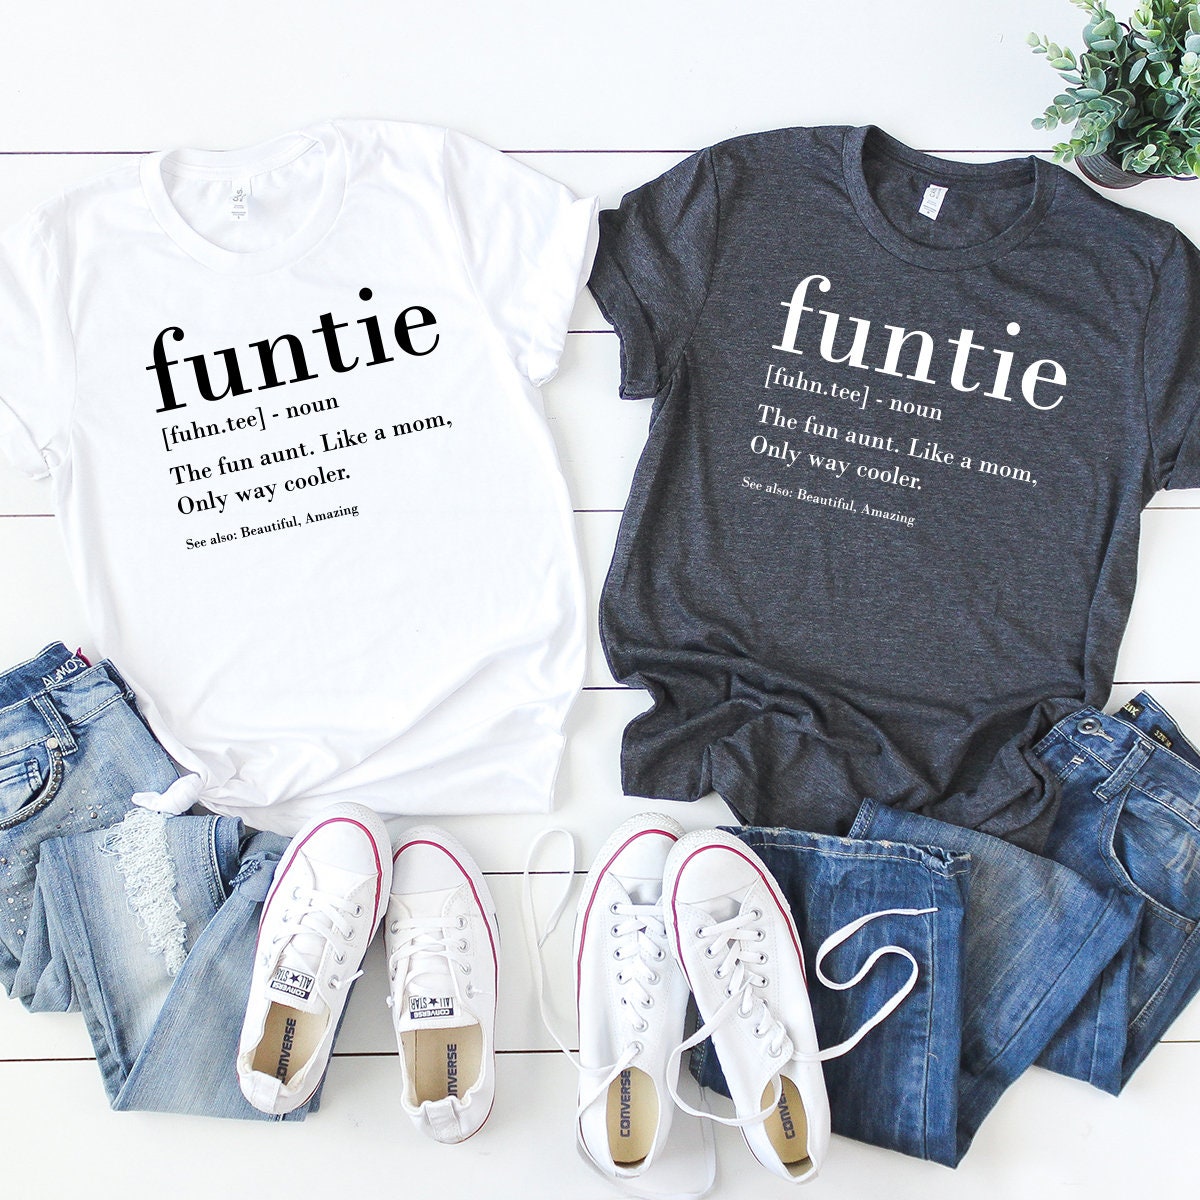 Funtie Definition Shirt, Auntie Shirts, Aunt T Shirt, Mother's Day TShirt, Gift For Aunt, Aunt Birthday Shirt, Funny Aunt Tee, Aunt Gift ZW - Fastdeliverytees.com